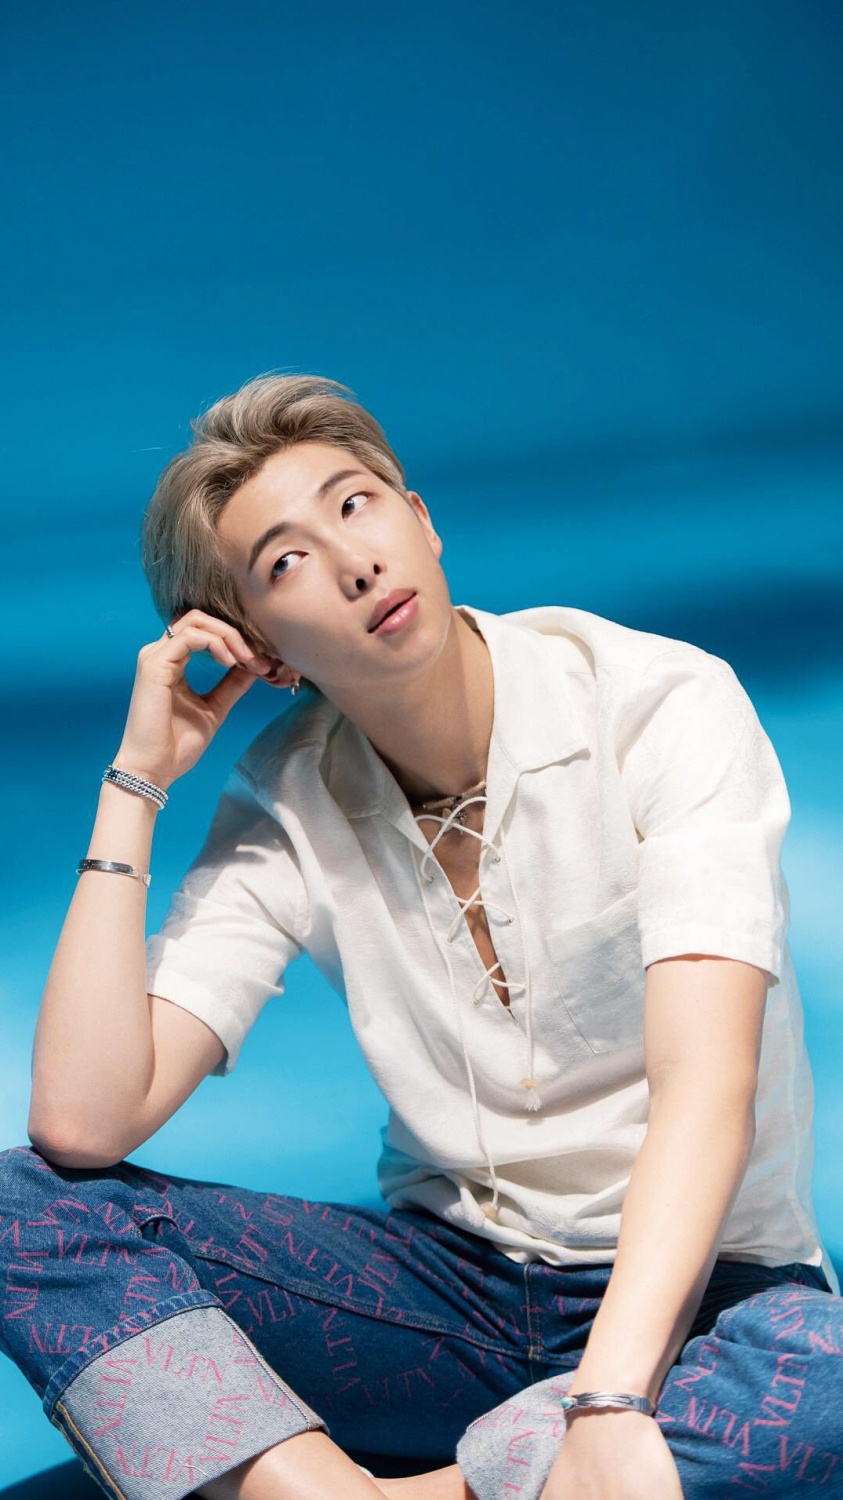 BTS Leader RM: “We Are Working On Our Next Album”